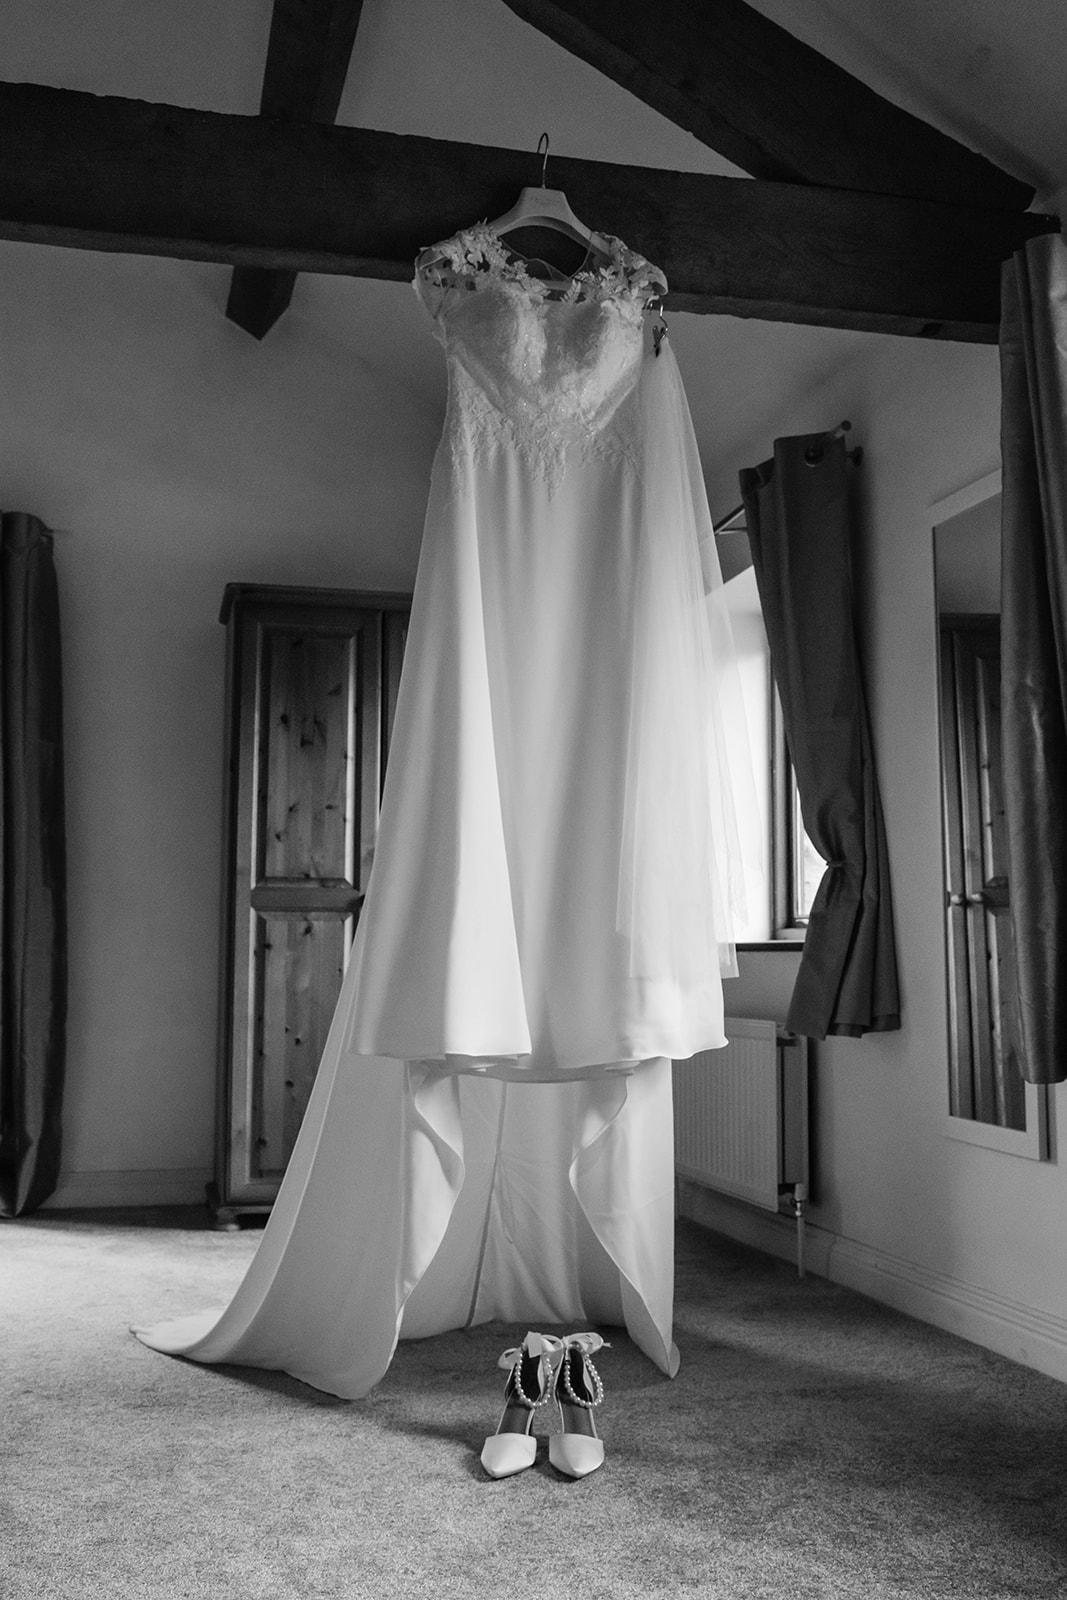 Hanging Wedding Dress in Black and White at Air bnb Cirencester Cotswolds 